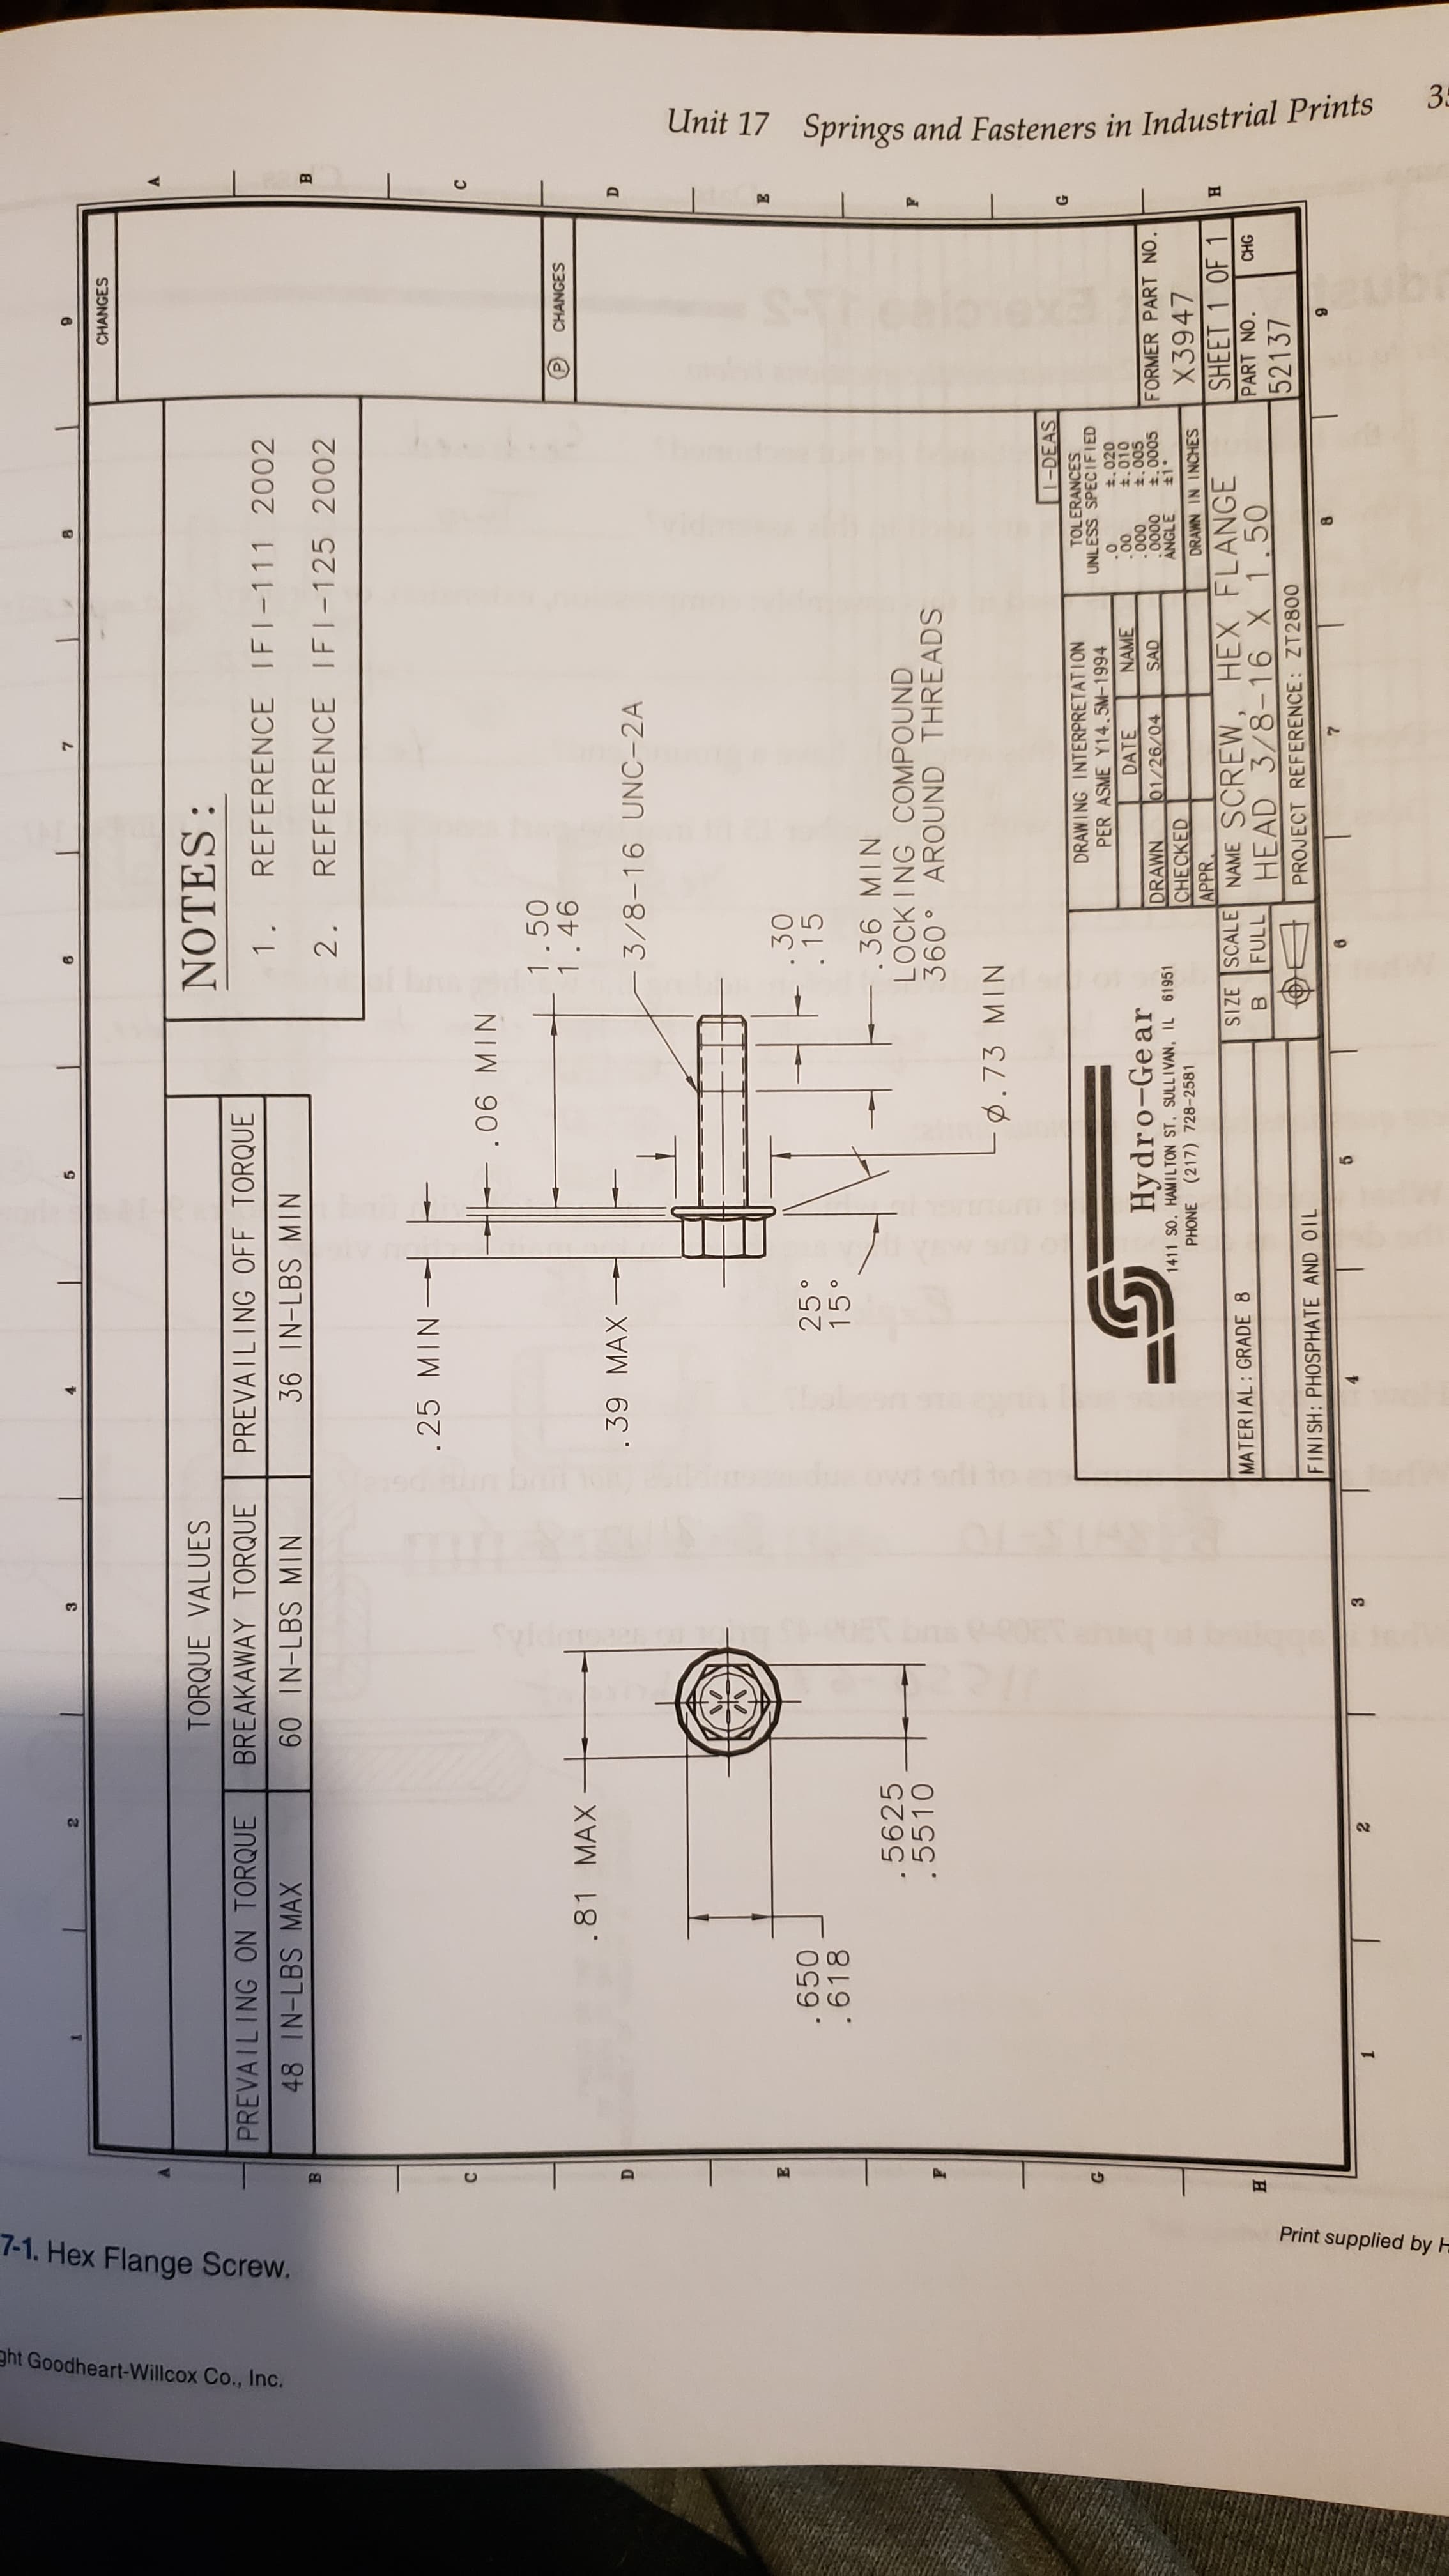 3
Unit 17
Springs and Fasteners in Industrial Prints
12
Print supplied by H
7-1. Hex Flange Screw.
ht Goodheart-Willcox Co., Inc.
CHANGES
TORQUE VALUES
BREAKAWAY TORQUE
NOTES:
PREVAILING ON TORQUE
PREVAILING OFF TORQUE
REFERENCE IFI-111 2002
48 IN-LBS MAX
60 IN-LBS MIN
36 IN-LBS MIN
2.
REFERENCE IFI-125 2002
.25 MIN
1.50
1.46
.81 MAX
CHANGES
. 39 MAX
3/8-16 UNC- 2A
.650
.618
. 30
.15
15
.36 MIN
.5625
.5510
LOCK ING COMPOUND
360 AROUND THREADS
ø. 73 MIN
1-DEAS
DRAWING INTERPRETATION
PER ASME Y14.5M-1994
TOLERANCES
UNLESS SPECIFIED
t.020
t.010
.005
Hydro-Gear
1411 SO. HAMILTON ST. SULLIVAN, IL 61951
PHONE (217) 728-2581
DATE
NAME
00
000
DRAWN
CHECKED
APPR
SIZE SCALE NAME SCREW
01/26/04
SAD
0000
ANGLE
FORMER PART NO.
த
X3947
DRAWN IN INCHES
HEX FLANGE
HEAD 3/8-16 X 1.50
SHEET 1 OF 1
PART NO.
52137
MATERIAL: GRADE 8
н
FULL
CHG
FINISH: PHOSPHATE AND OIL
PROJECT REFERENCE: ZT2800
